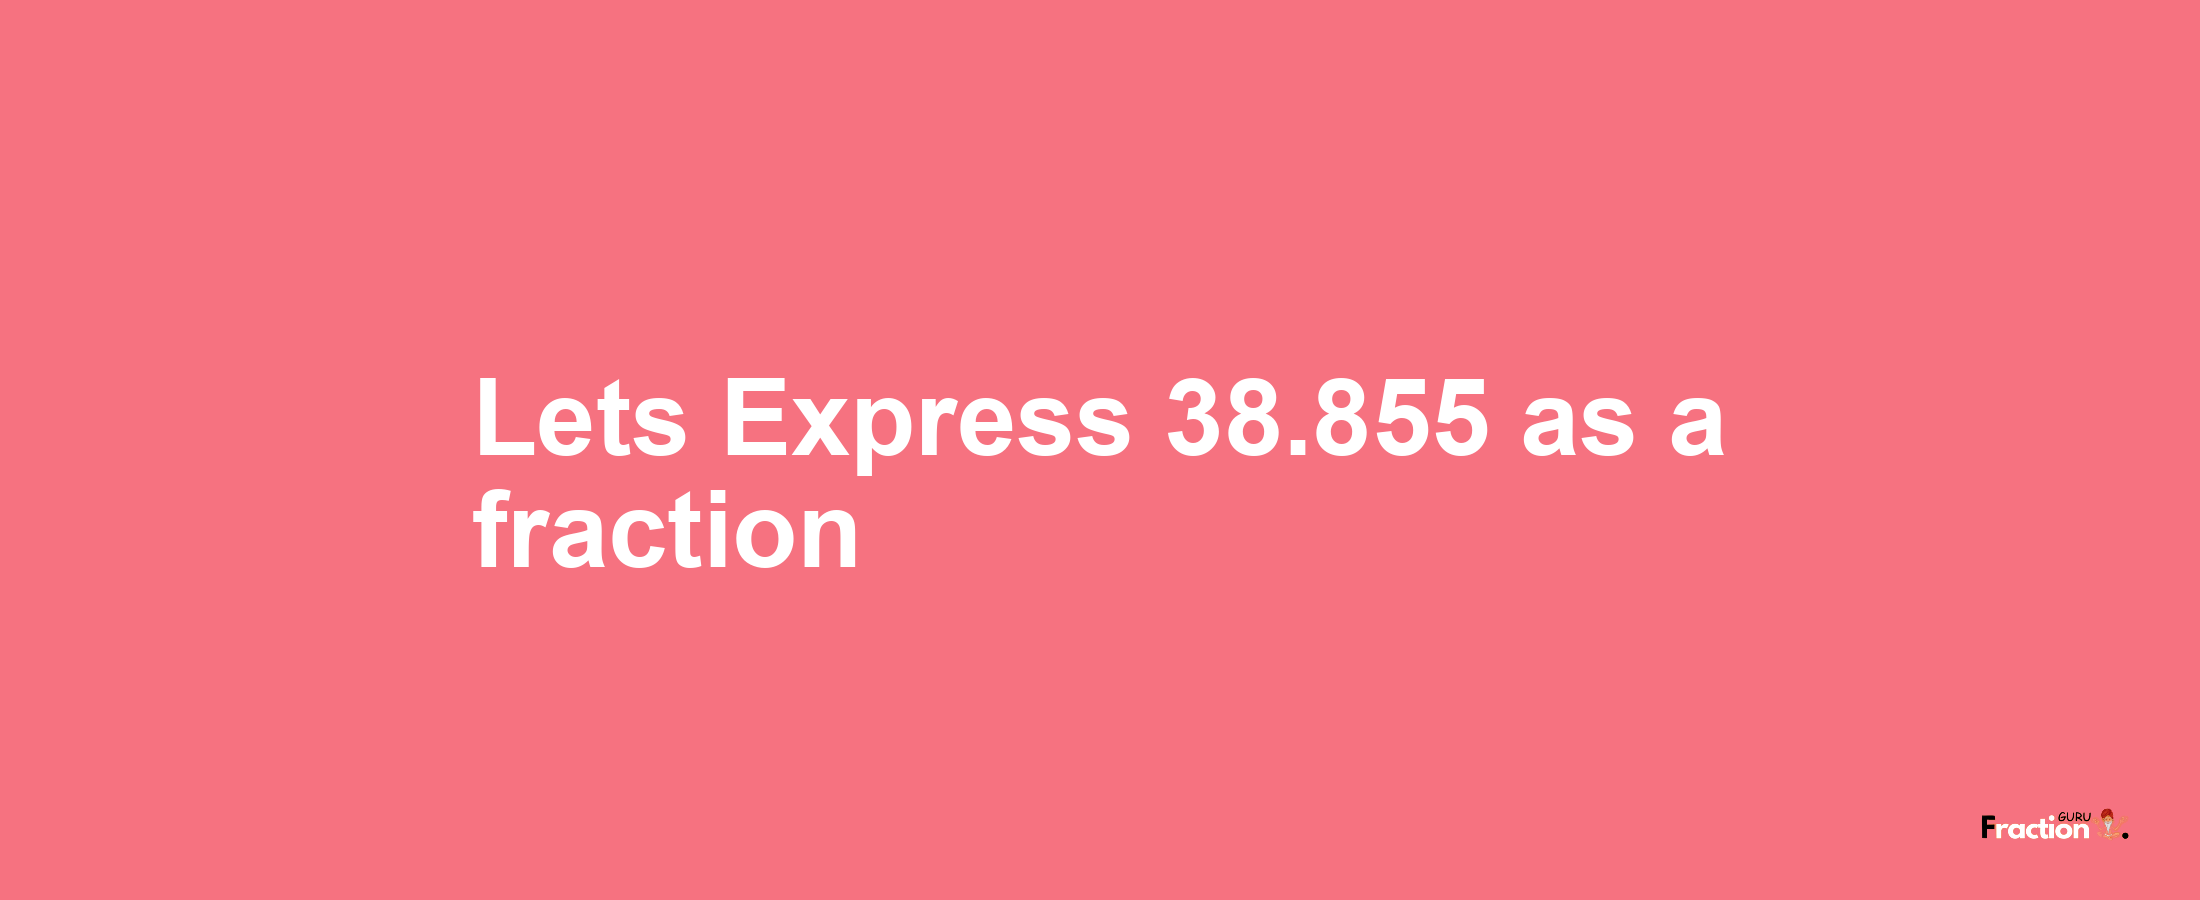 Lets Express 38.855 as afraction